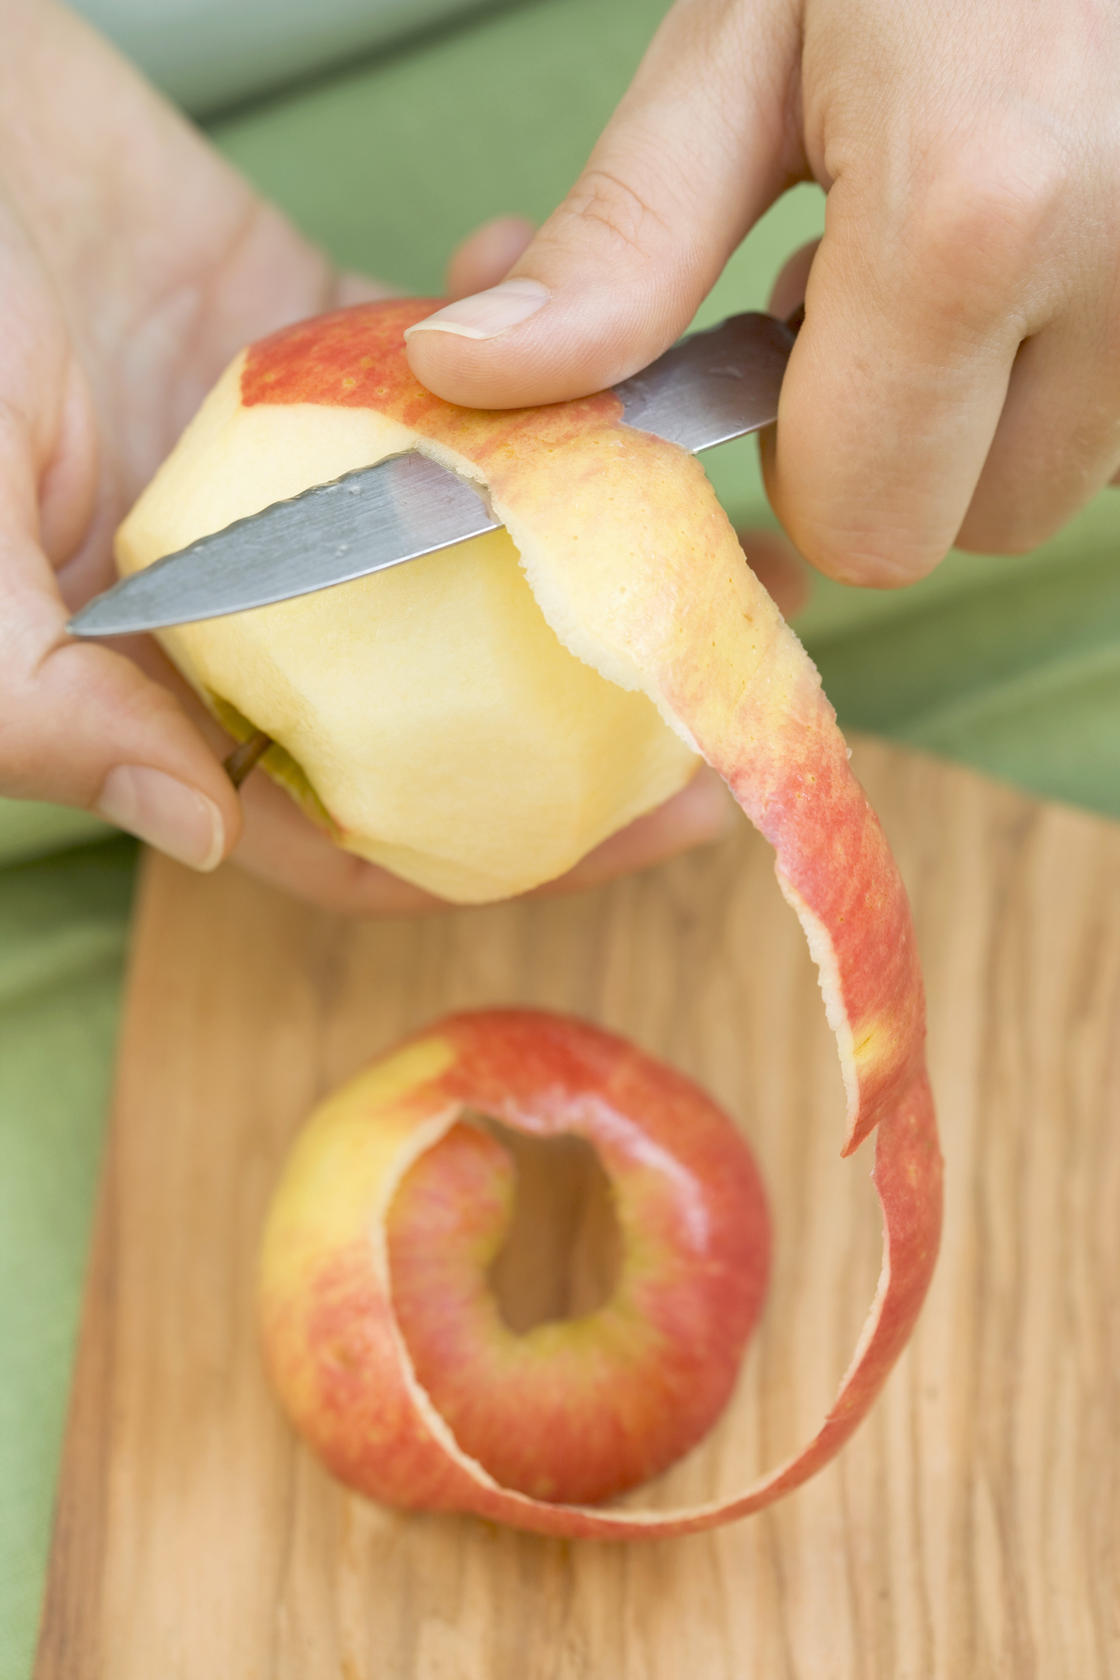 Apple peel is a good source of vitamins, and can be used to flavour mulled wine. Photo: Corbis